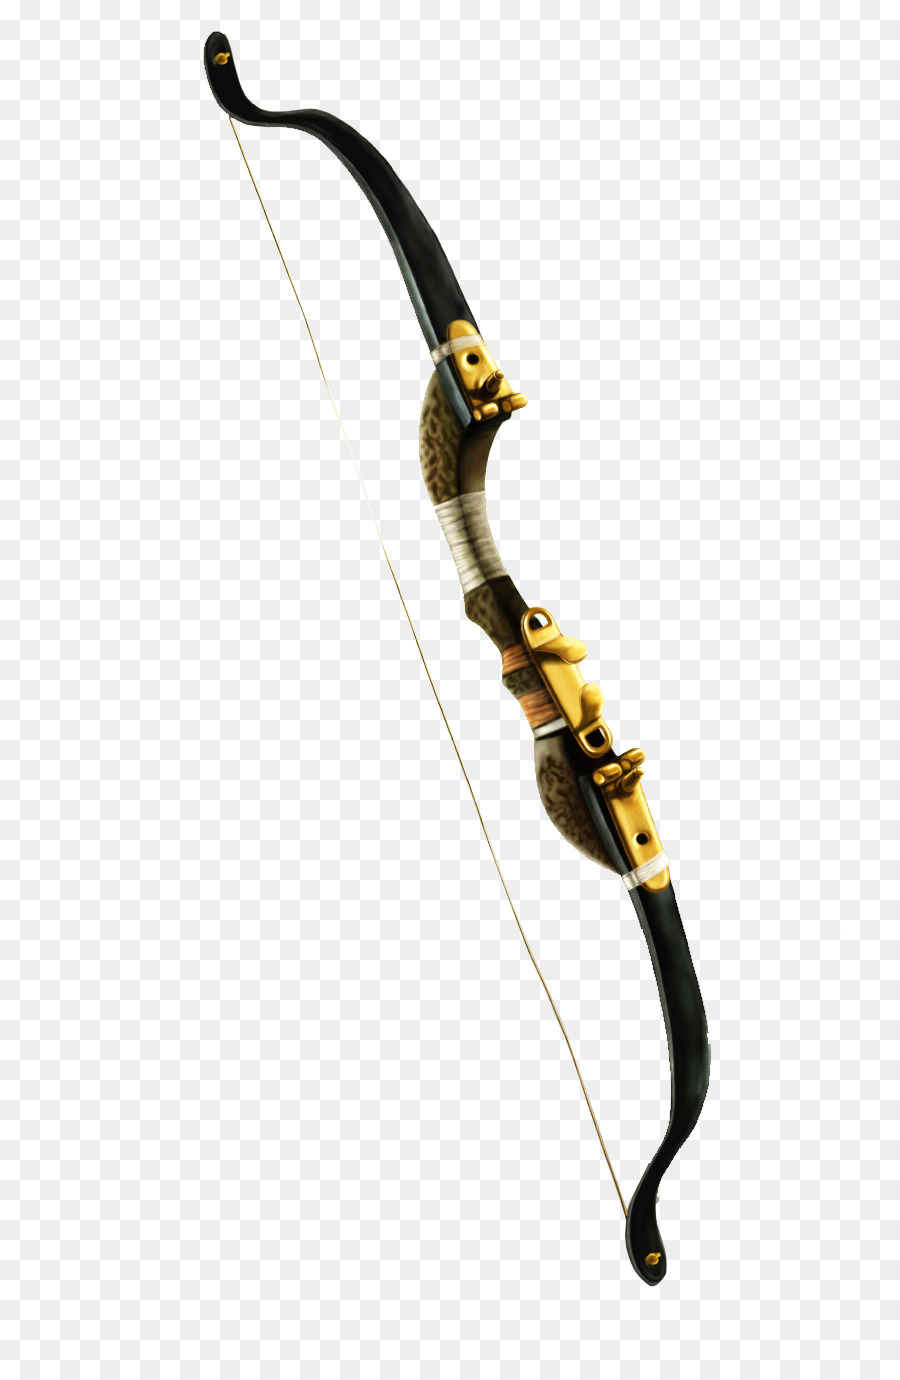 Bow and arrow - bow png download - 900*1368 - Free Transparent Bow And Arrow png Download.